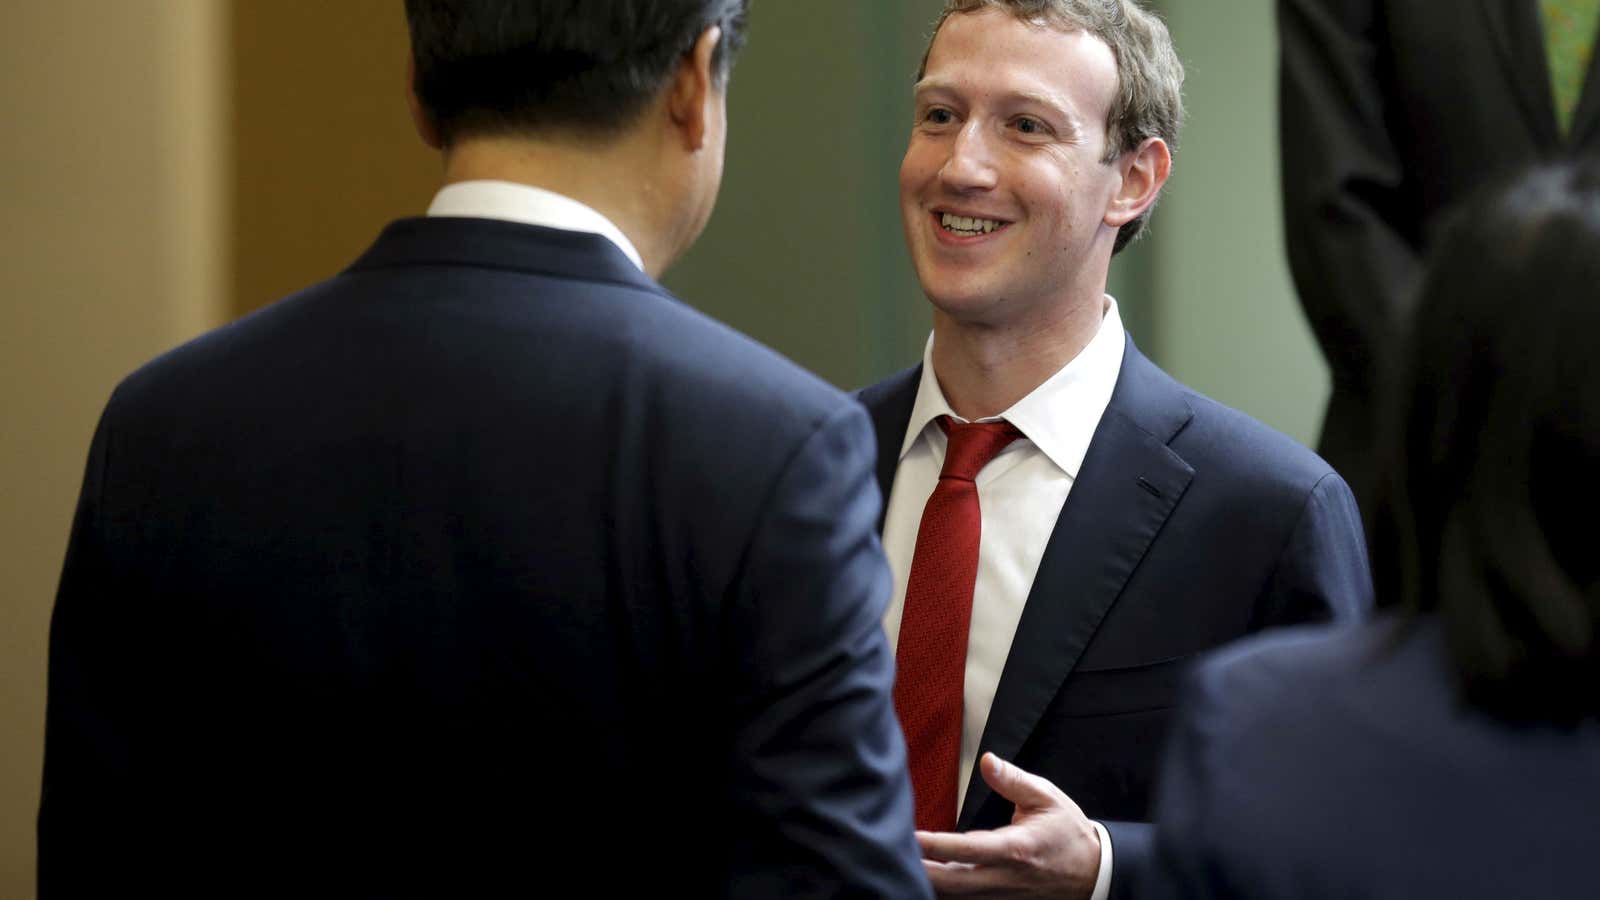 Mark Zuckerberg shakes hands with Chinese President Xi Jinping in 2015.